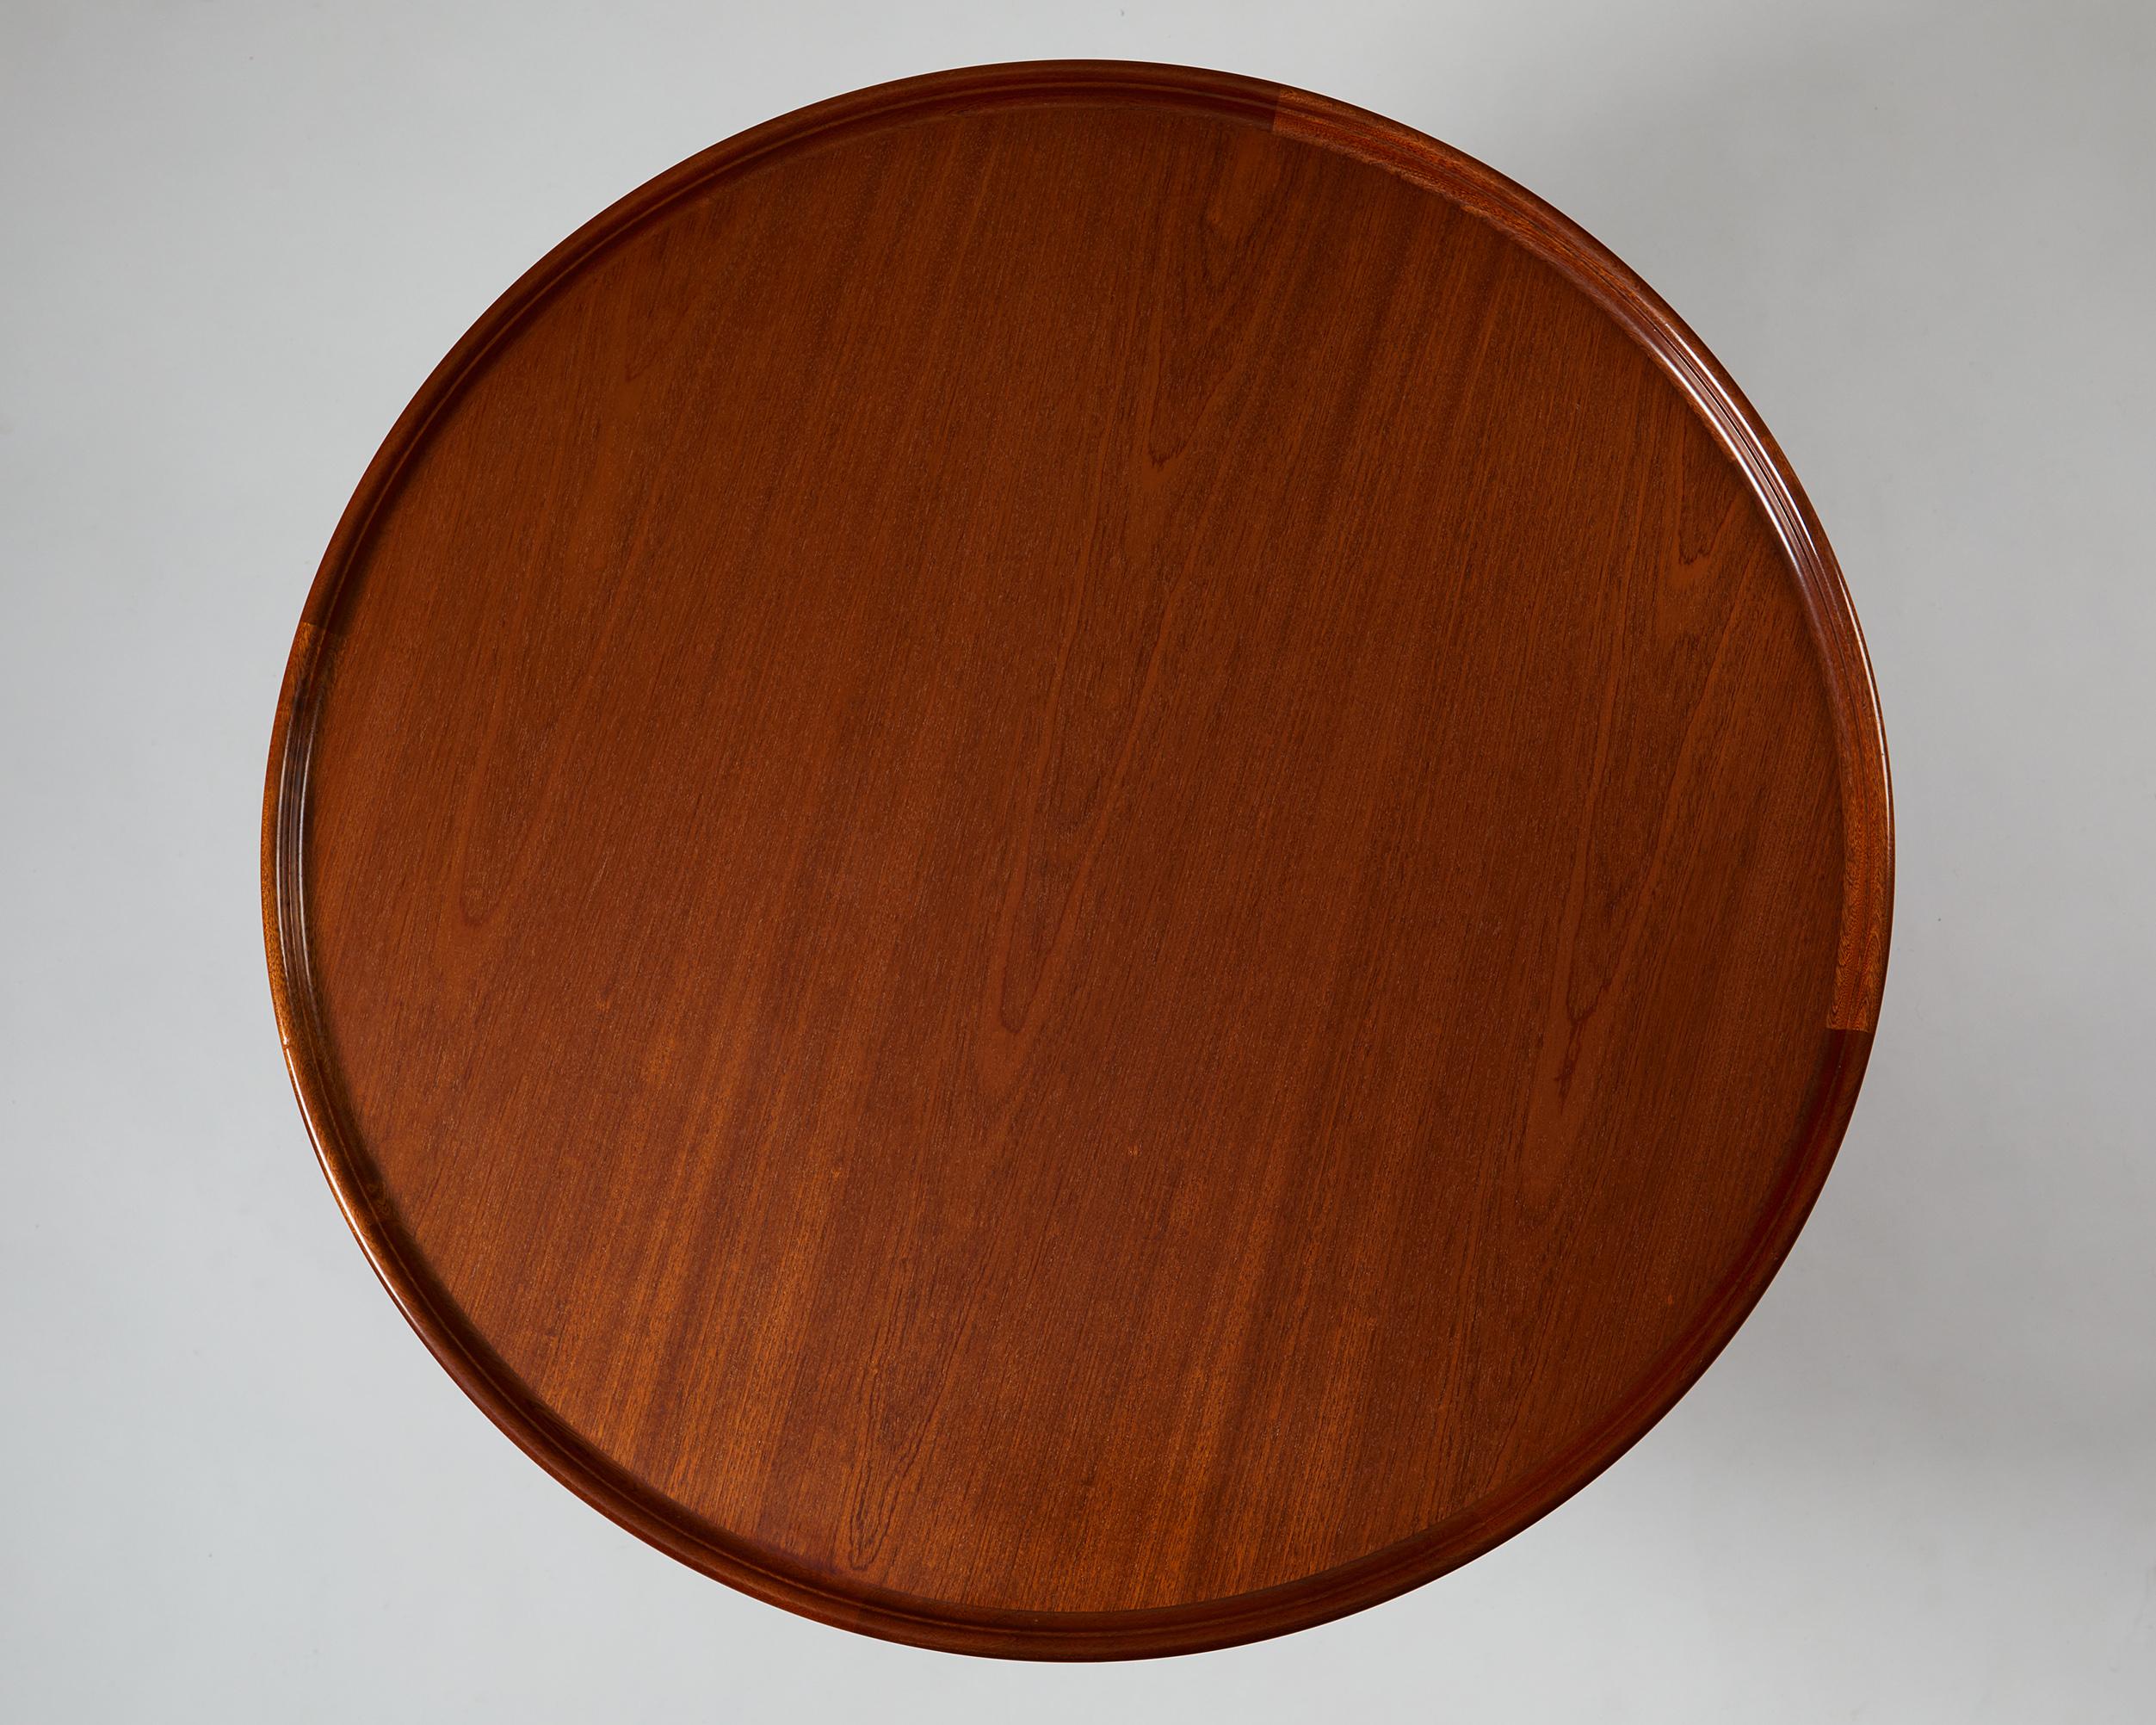 Mid-20th Century Occasional Table “The Egyptian table”, Designed by Mogens Lassen